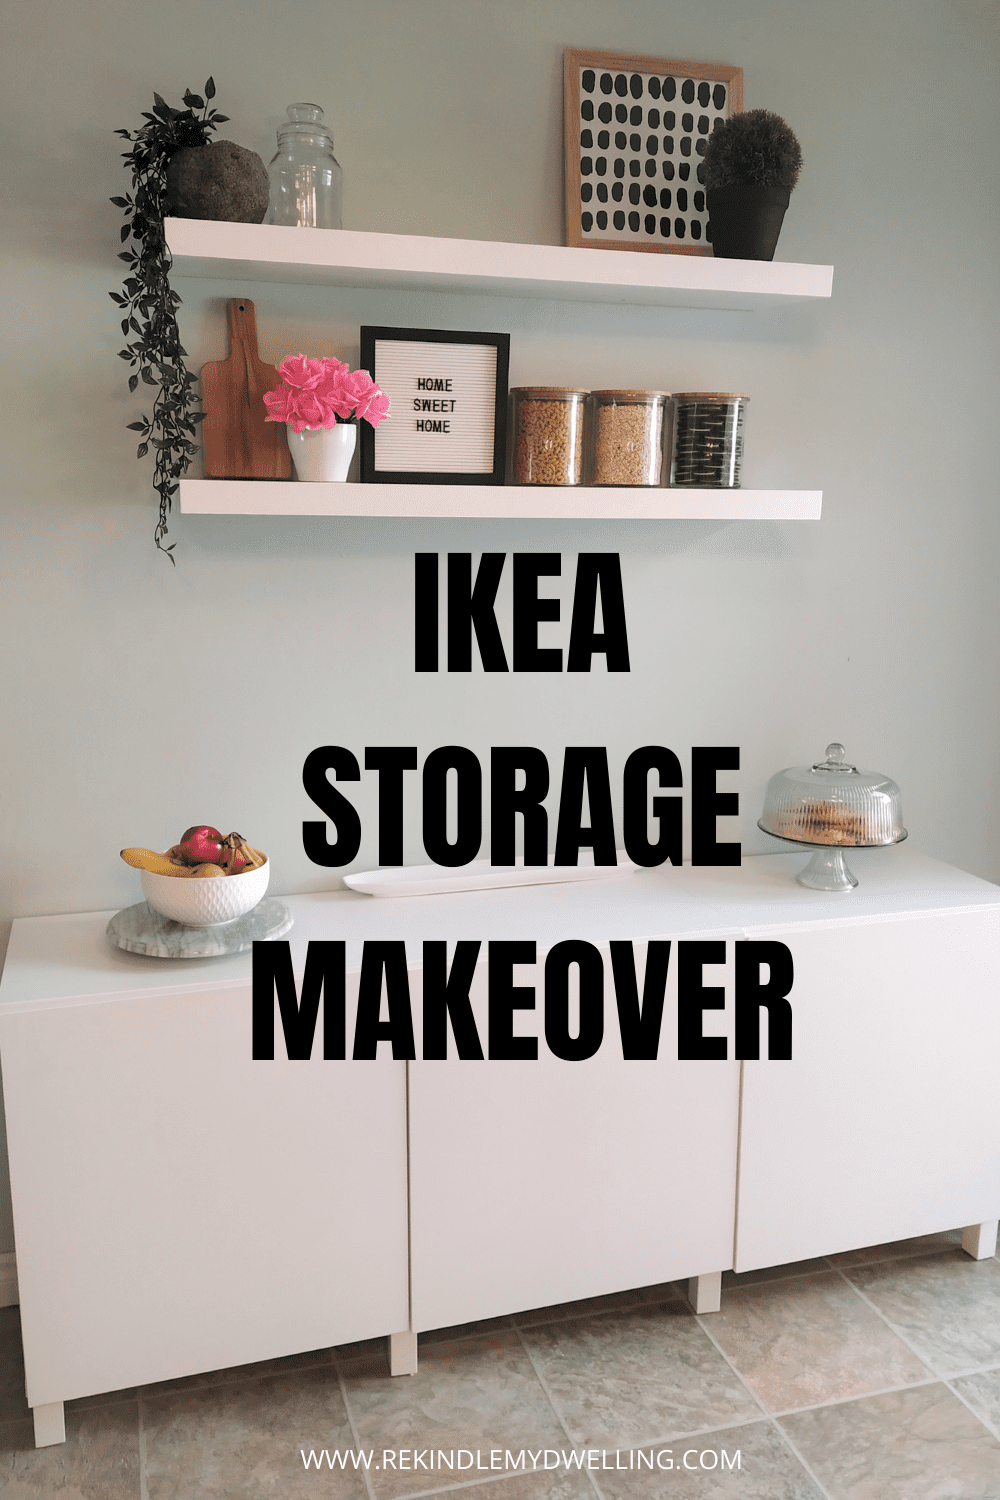 Ikea storage makeover with text overlay.